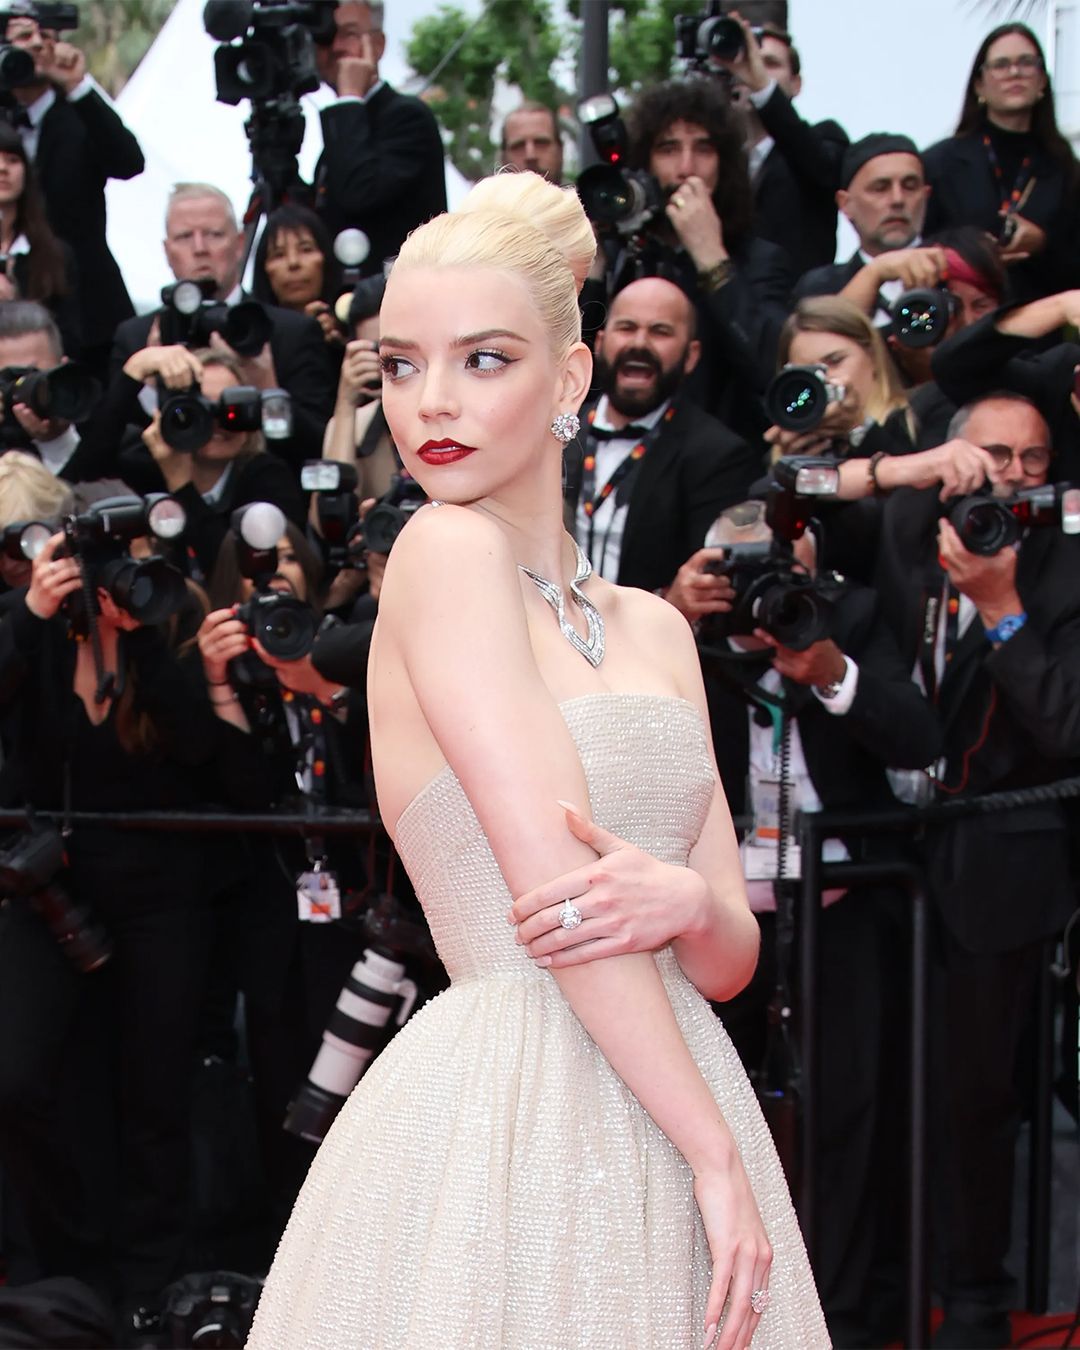 Highlights of the second day of the Cannes Film Festival A day dedicated to powerful women